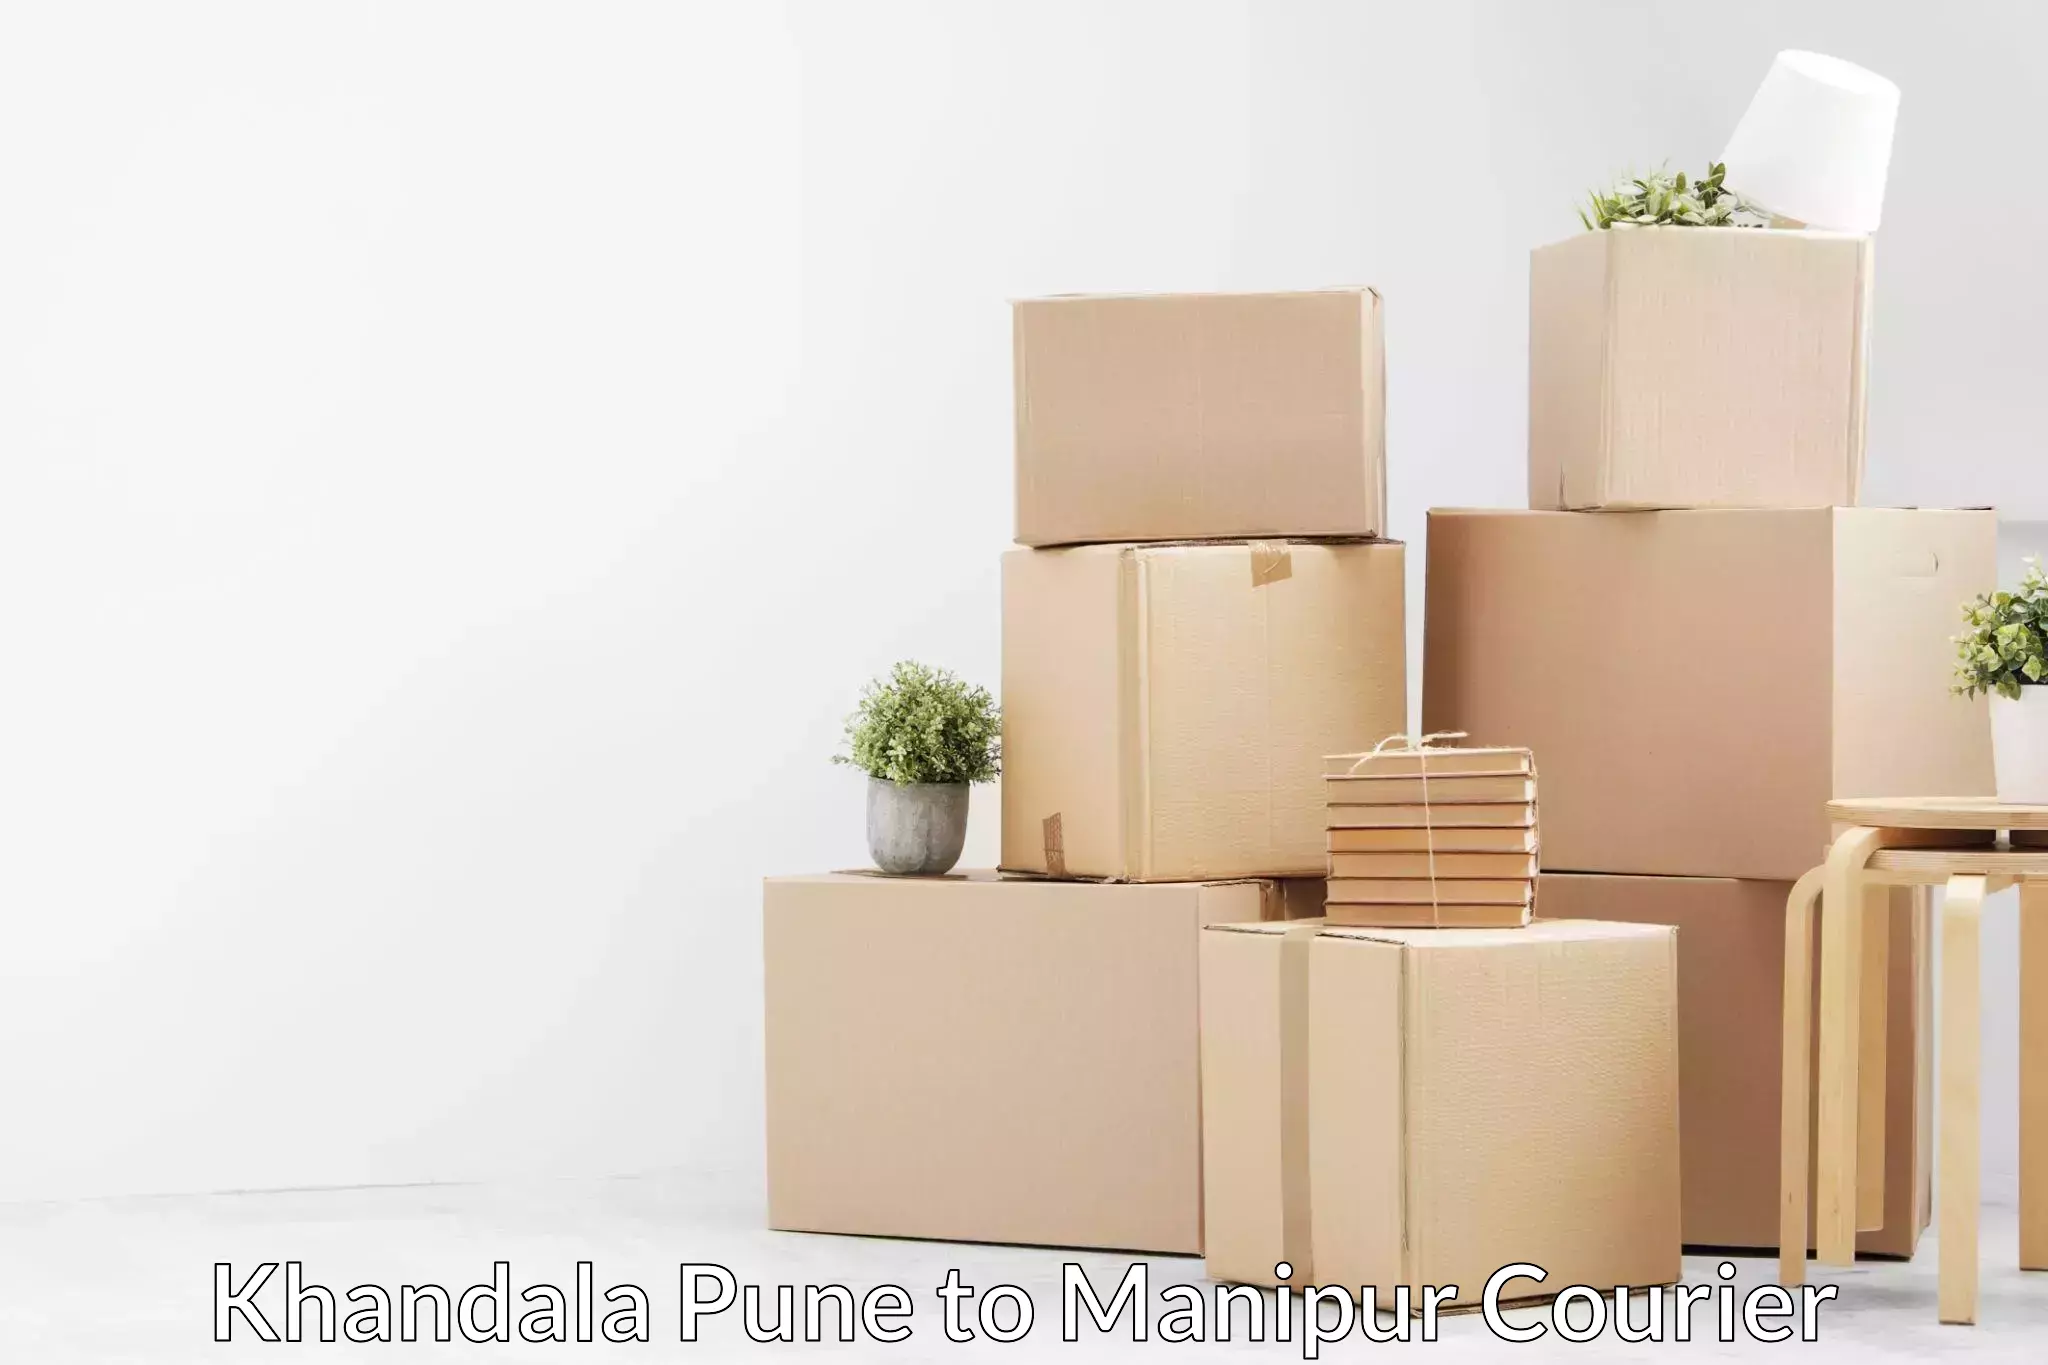 Quality relocation assistance Khandala Pune to Manipur